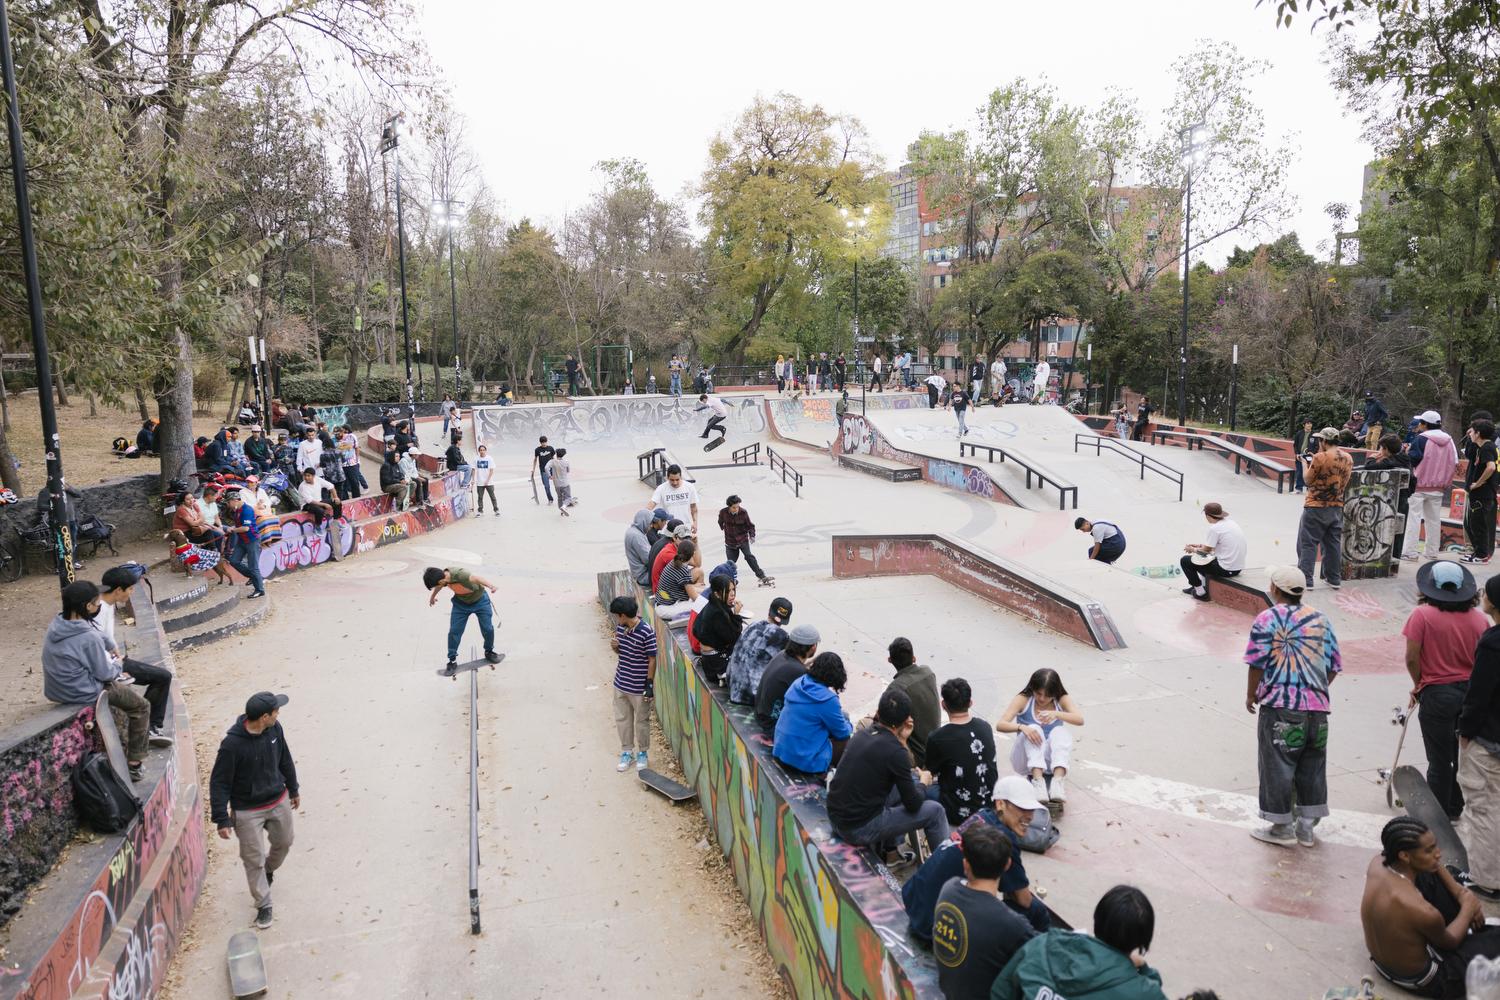 Mexico City, Mexico. January 8, 2021. A skateboarding competition at Parque Lira Skatepark in...